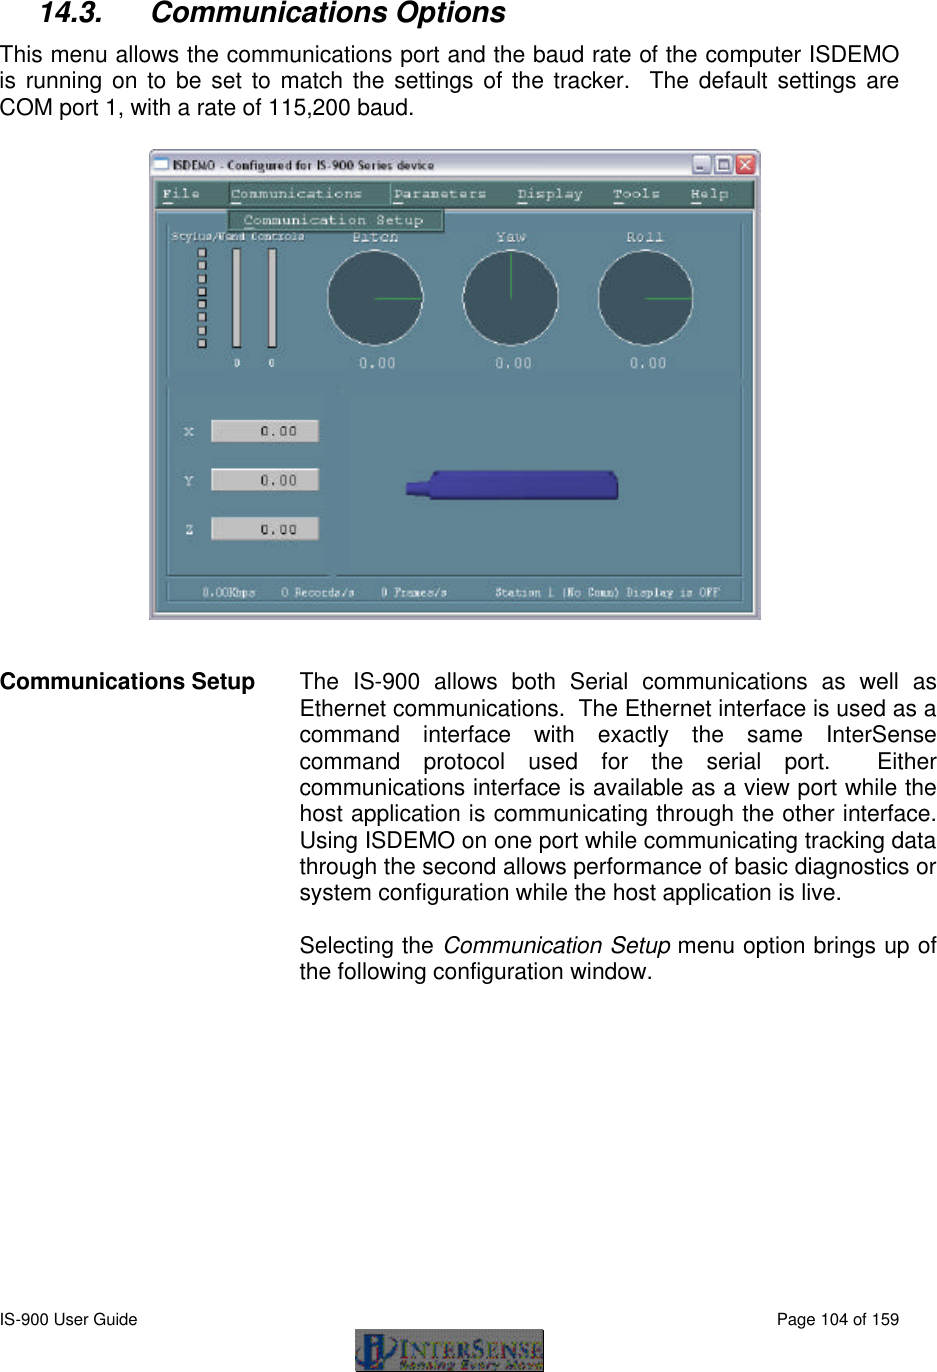  IS-900 User Guide                                                                                                                                          Page 104 of 159   14.3. Communications Options This menu allows the communications port and the baud rate of the computer ISDEMO is running on to be set to match the settings of the tracker.  The default settings are COM port 1, with a rate of 115,200 baud.   Communications Setup  The IS-900 allows both Serial communications as well as Ethernet communications.  The Ethernet interface is used as a command interface with exactly the same InterSense command protocol used for the serial port.  Either communications interface is available as a view port while the host application is communicating through the other interface.  Using ISDEMO on one port while communicating tracking data through the second allows performance of basic diagnostics or system configuration while the host application is live.  Selecting the Communication Setup menu option brings up of the following configuration window.  